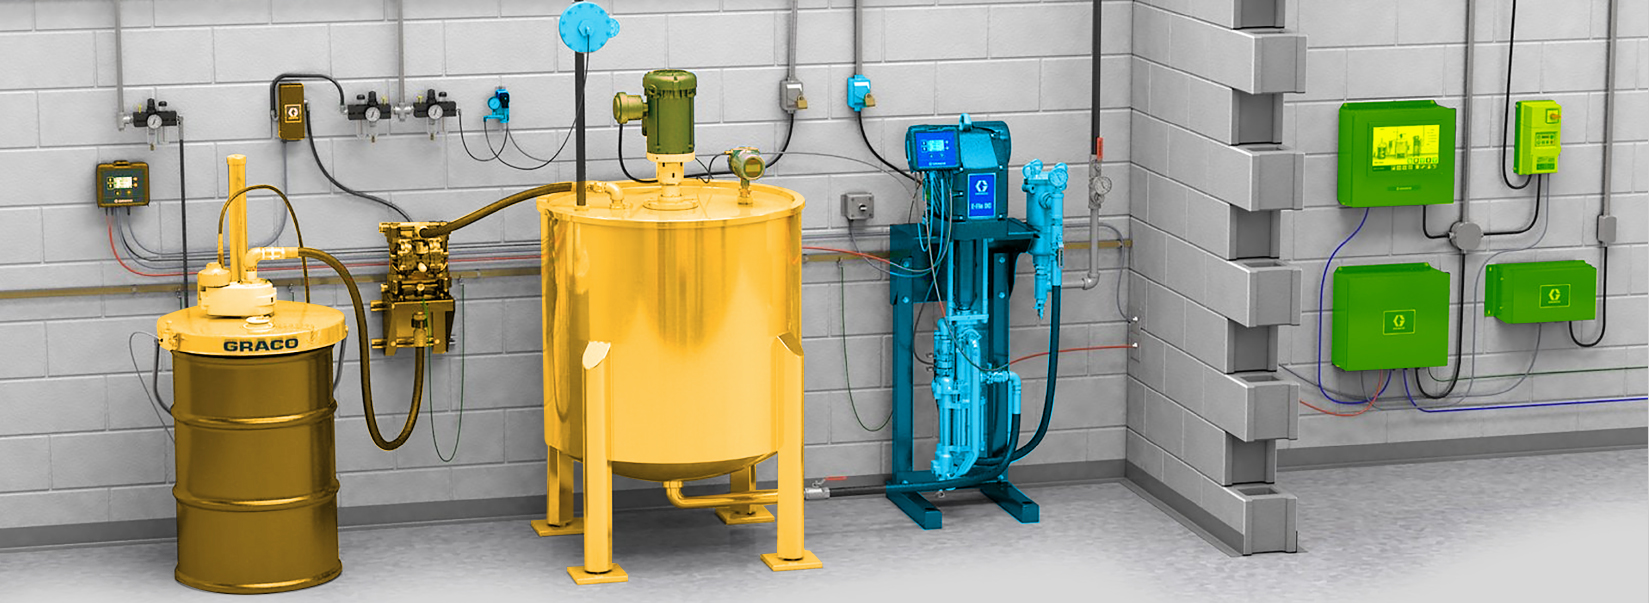 Factory paint kitchen diagram highlights different areas of control. Tank control is in yellow. Pump control is in blue. Overall or remote control is in green.